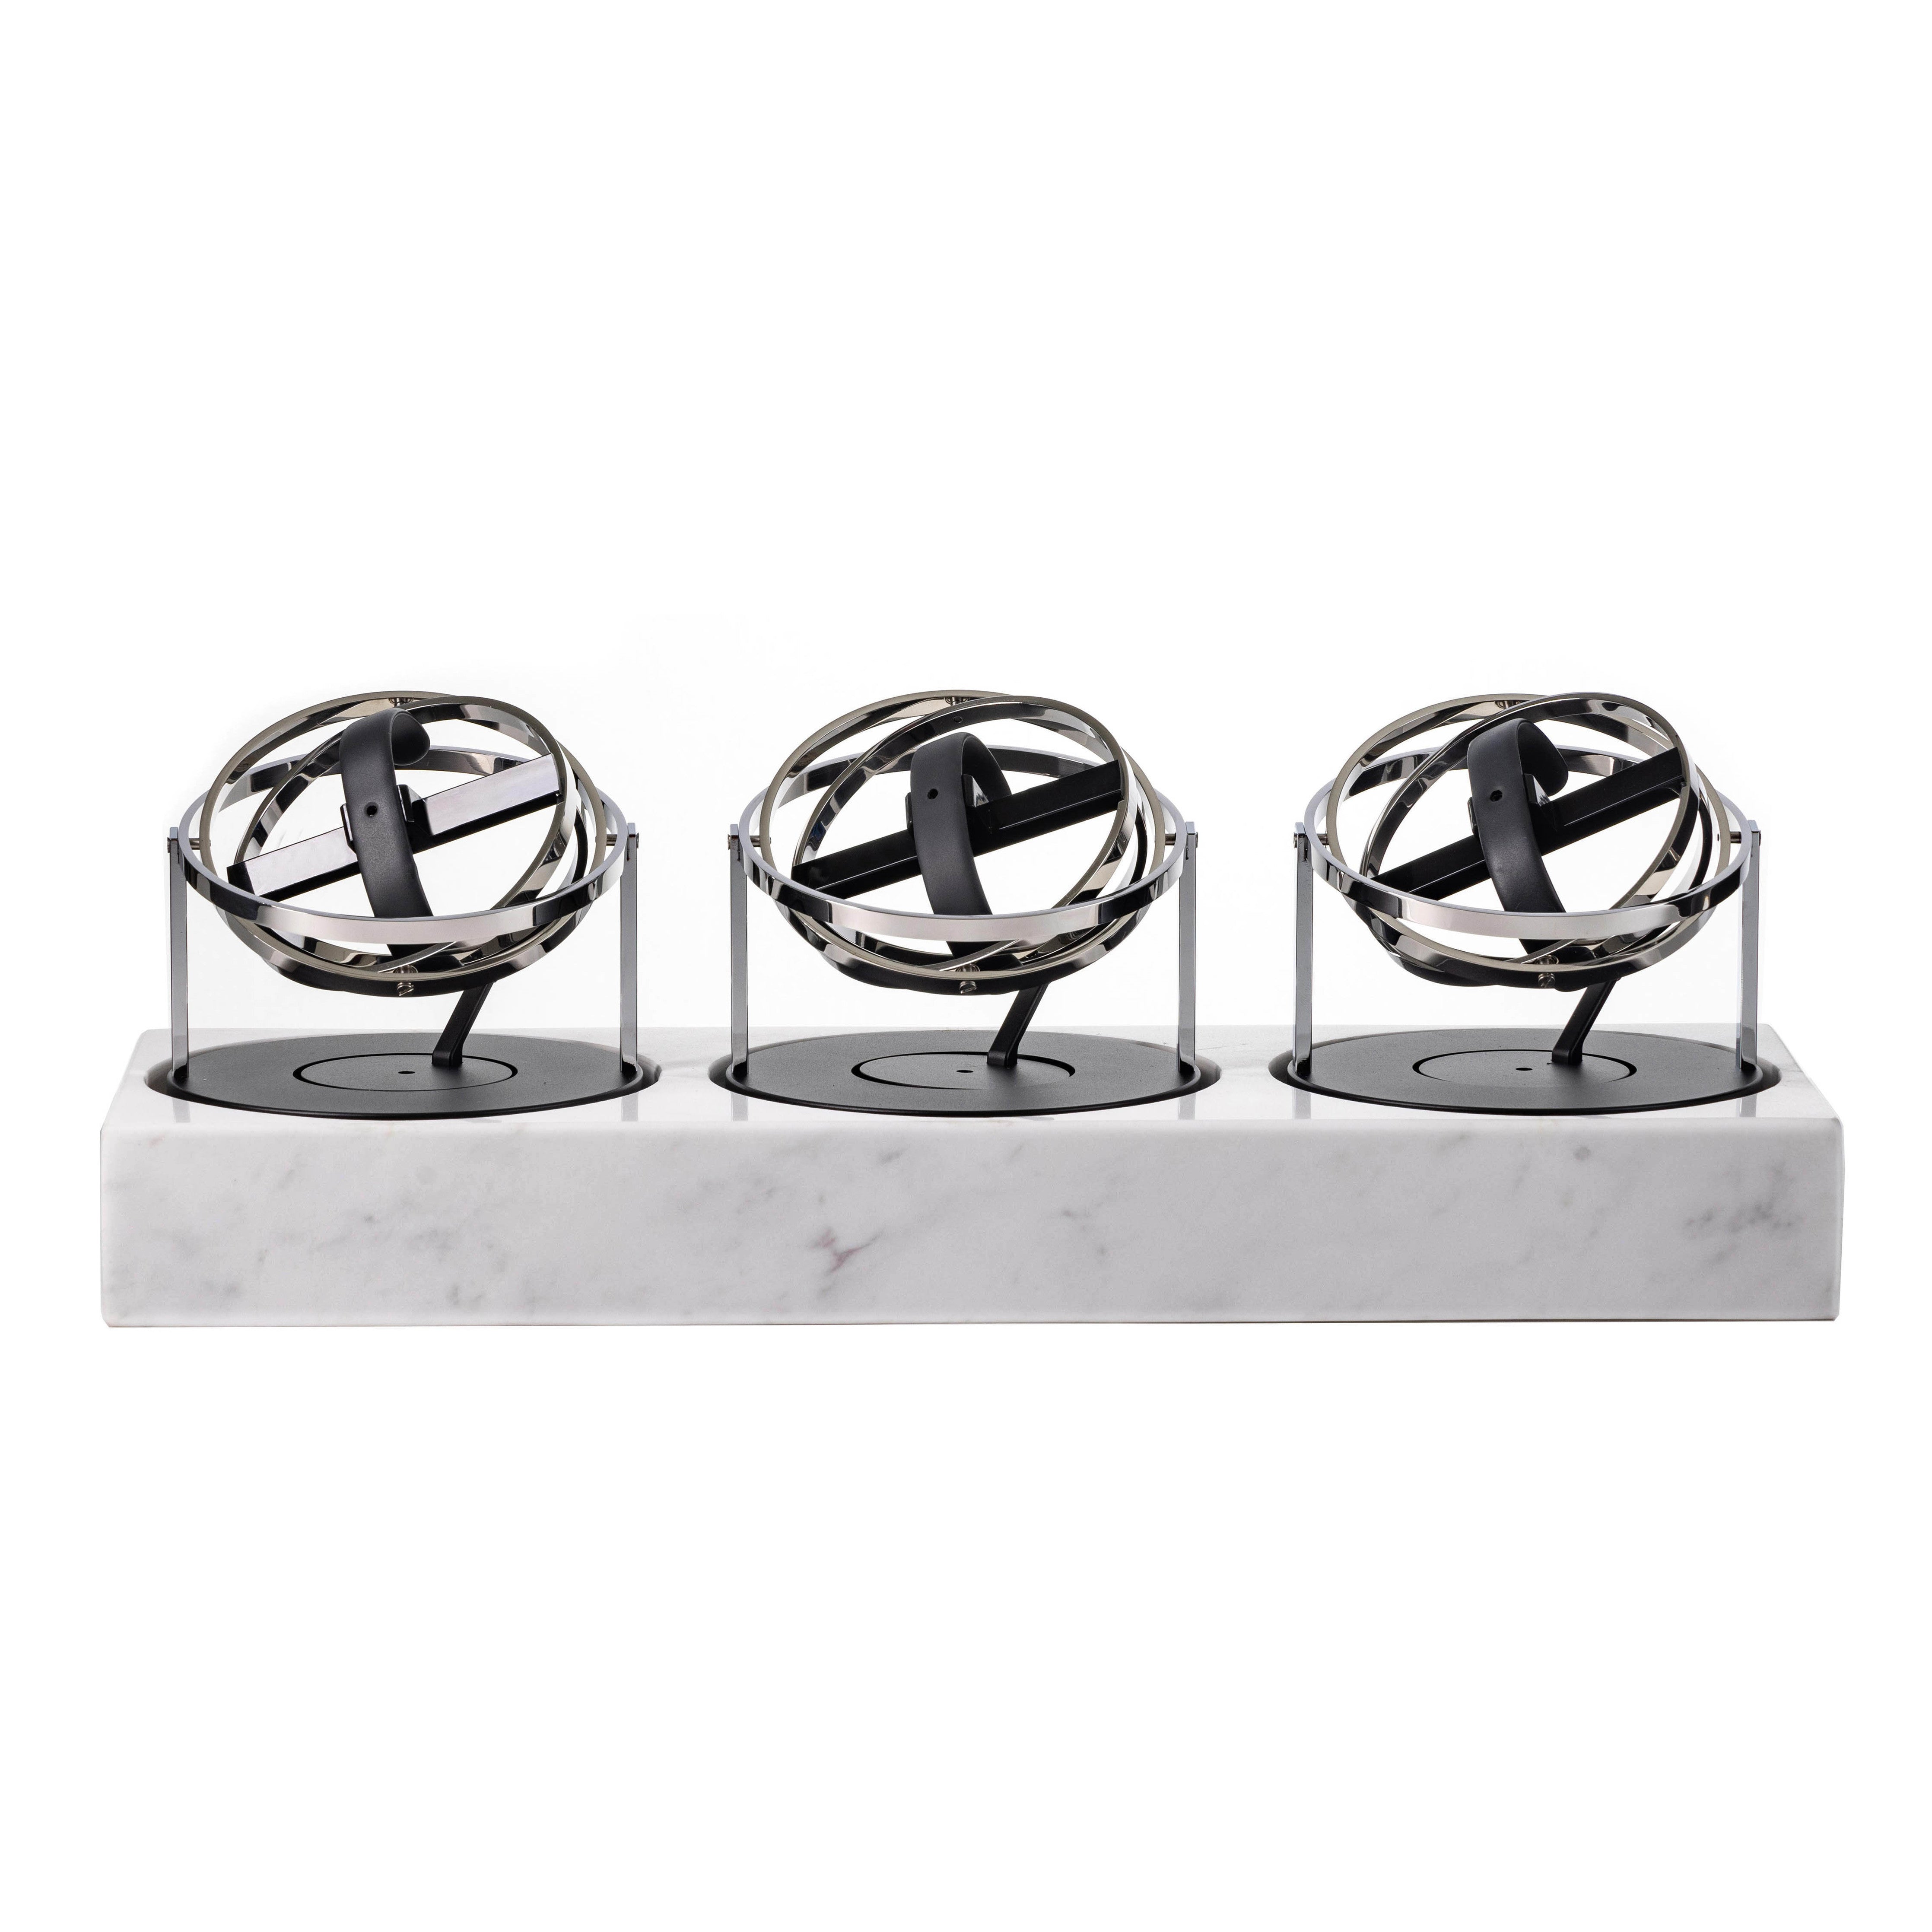 Triple Watch Winder - Astronomia X1 Silver - White Marble Edition